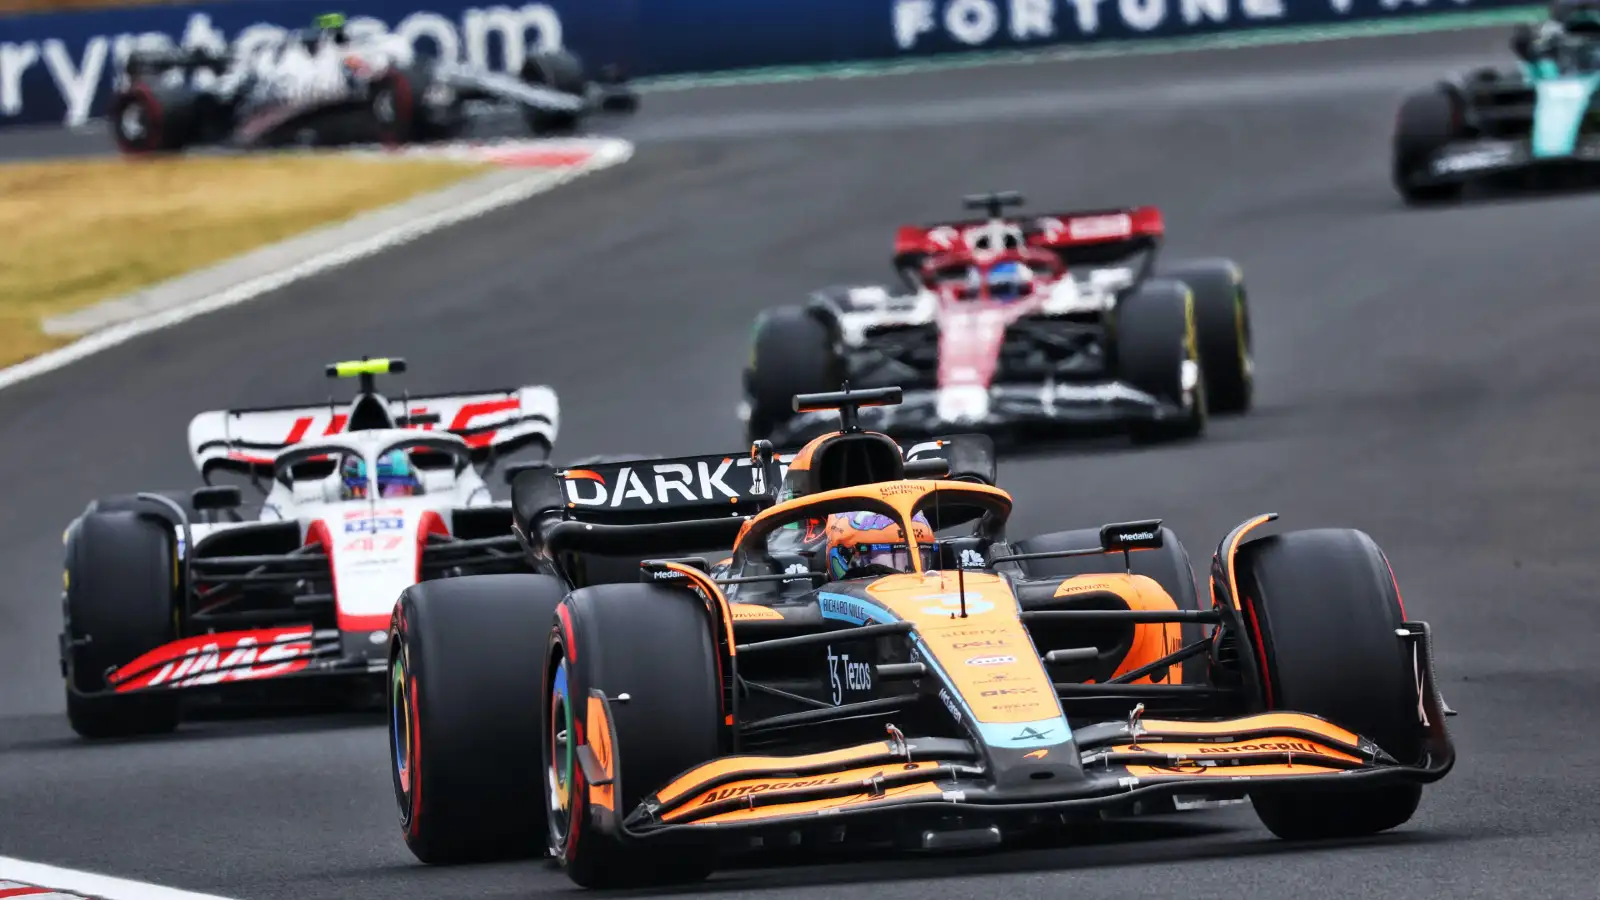 Cars in action at the 2022 Hungarian Grand Prix. Budapest, July 2022. Qualifying format